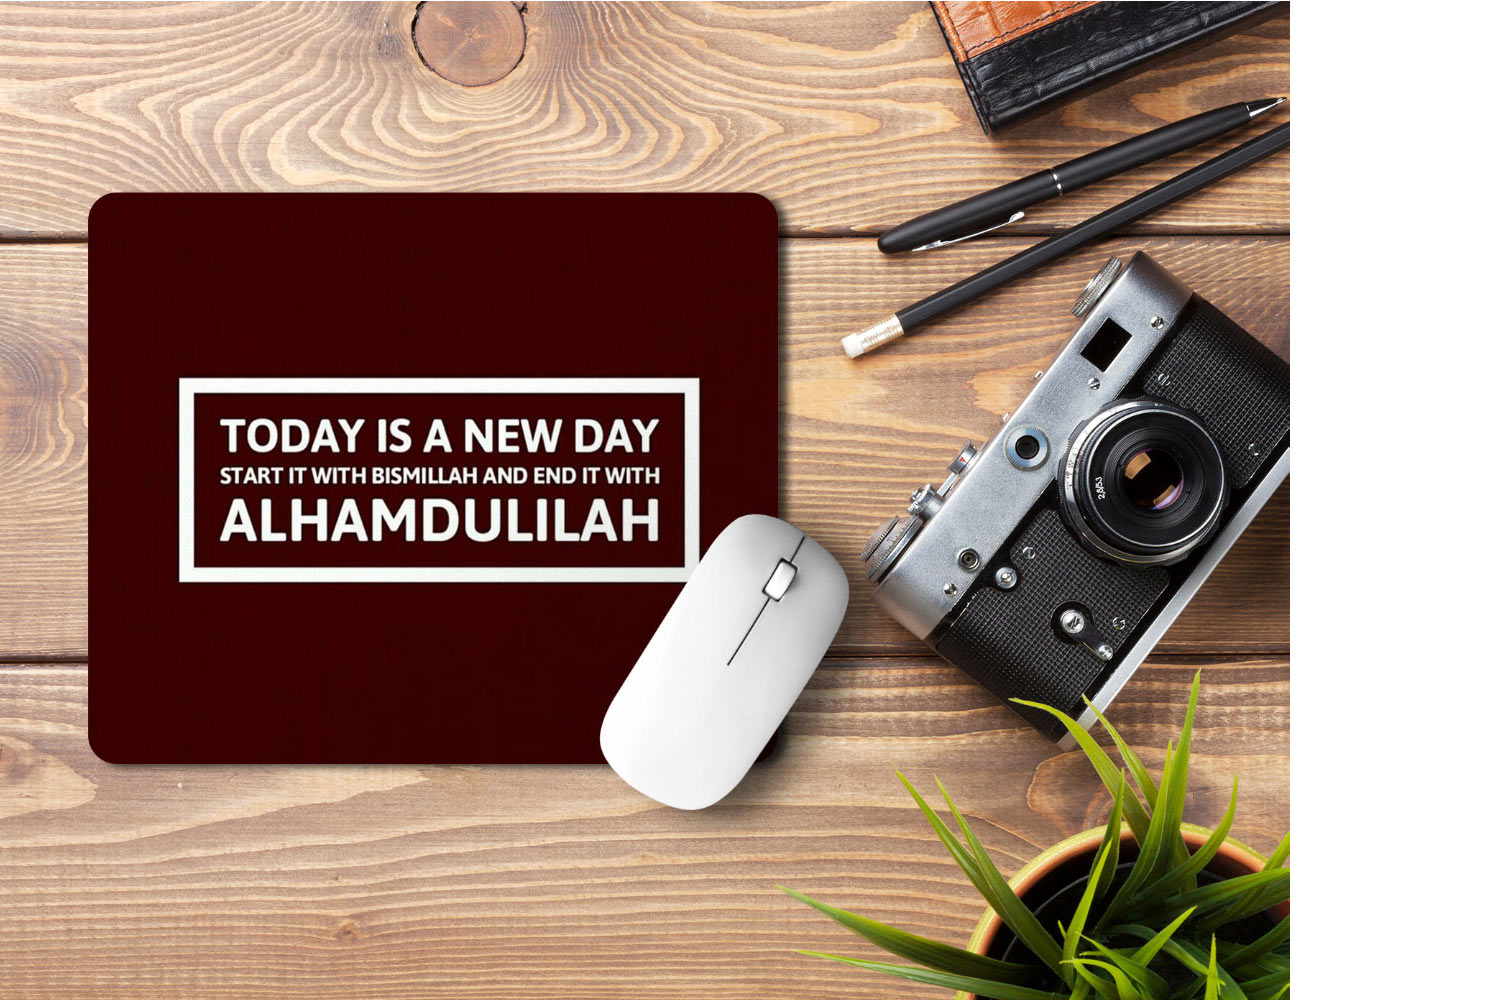 Today is a new day start it with Bismillah and ends it with Alhamdulillah' Printed Non-Slip Rubber Base Mouse Pad for Laptop, PC, Computer.